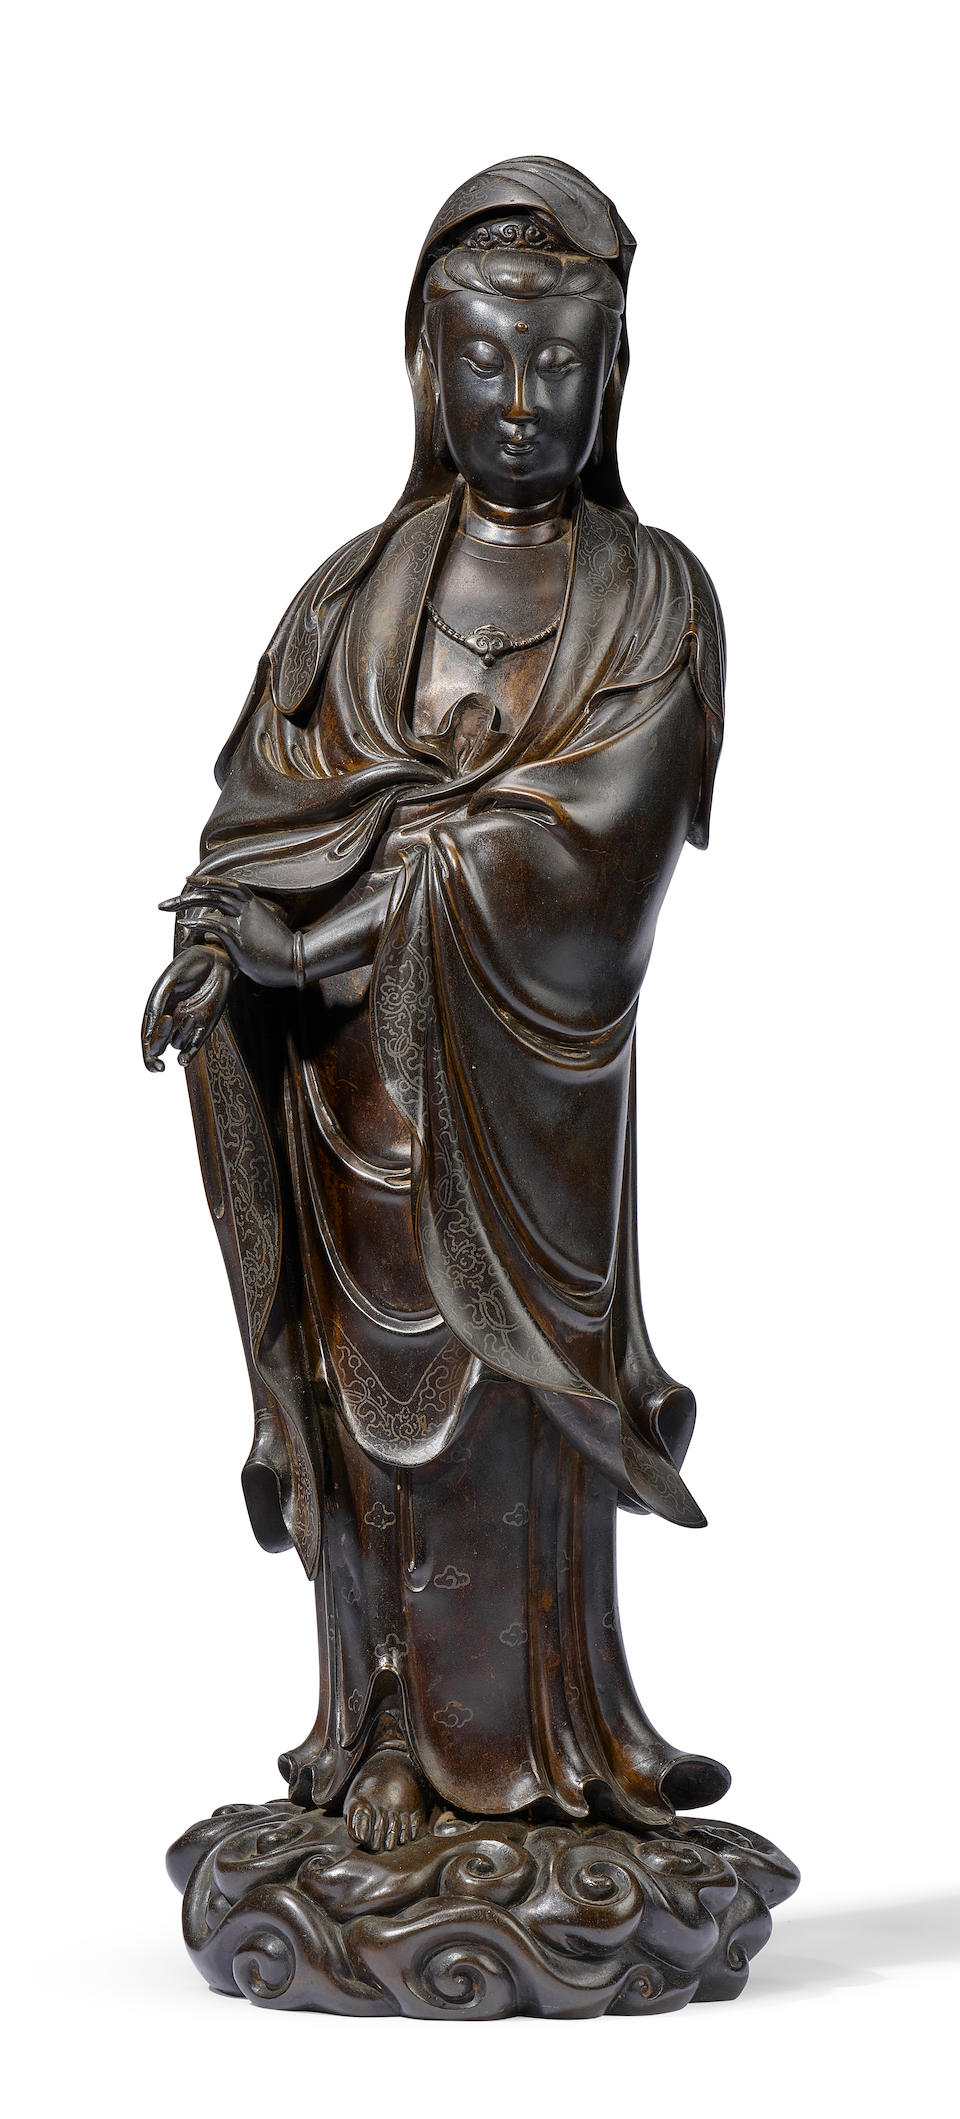 A VERY RARE AND LARGE SILVER-INLAID BRONZE FIGURE OF GUANYIN 16th/17th century